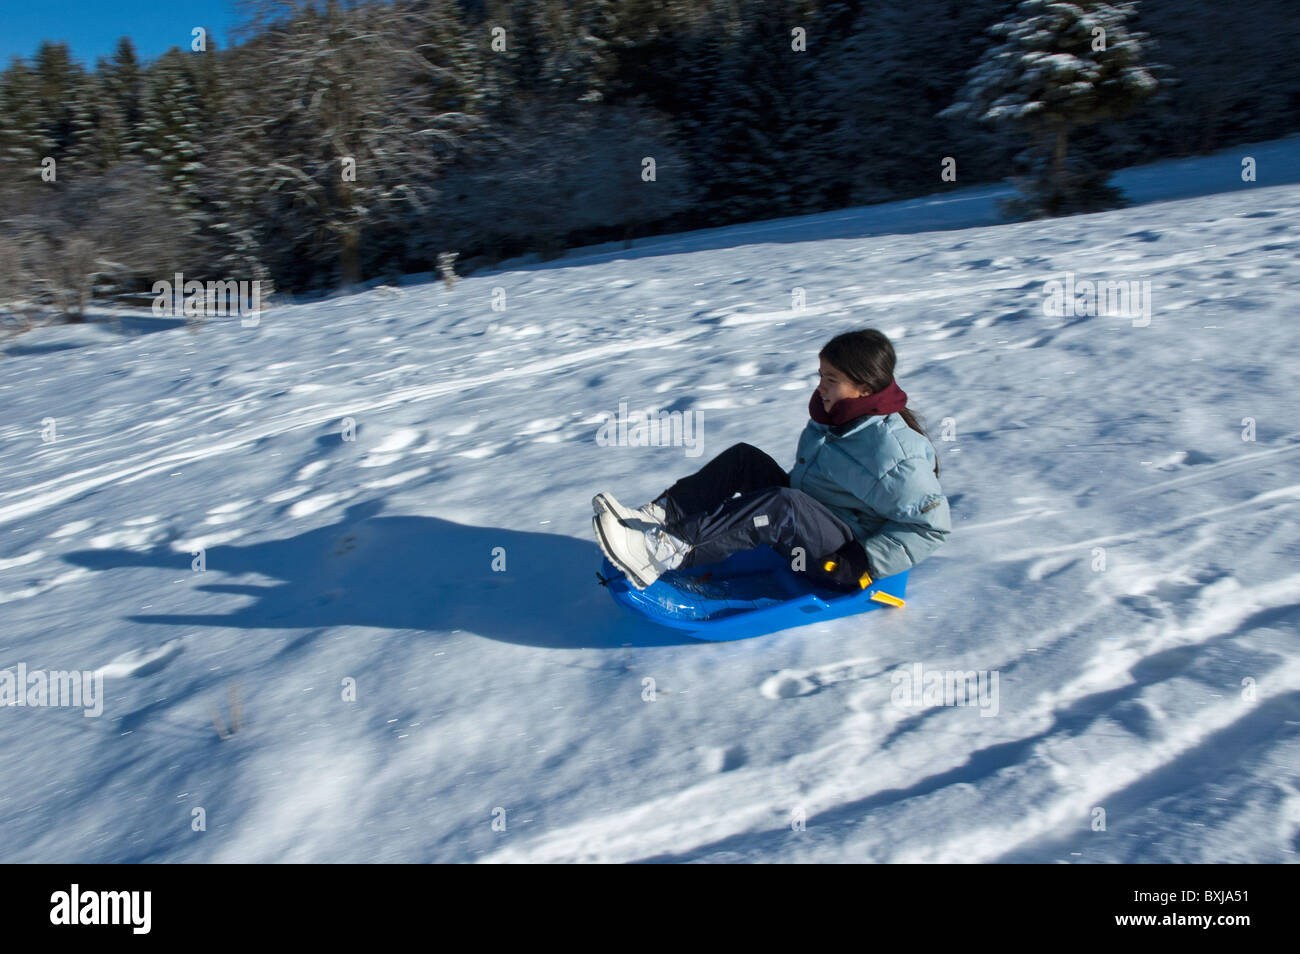 Young girl sledding down a snowy hill. Stock Photo